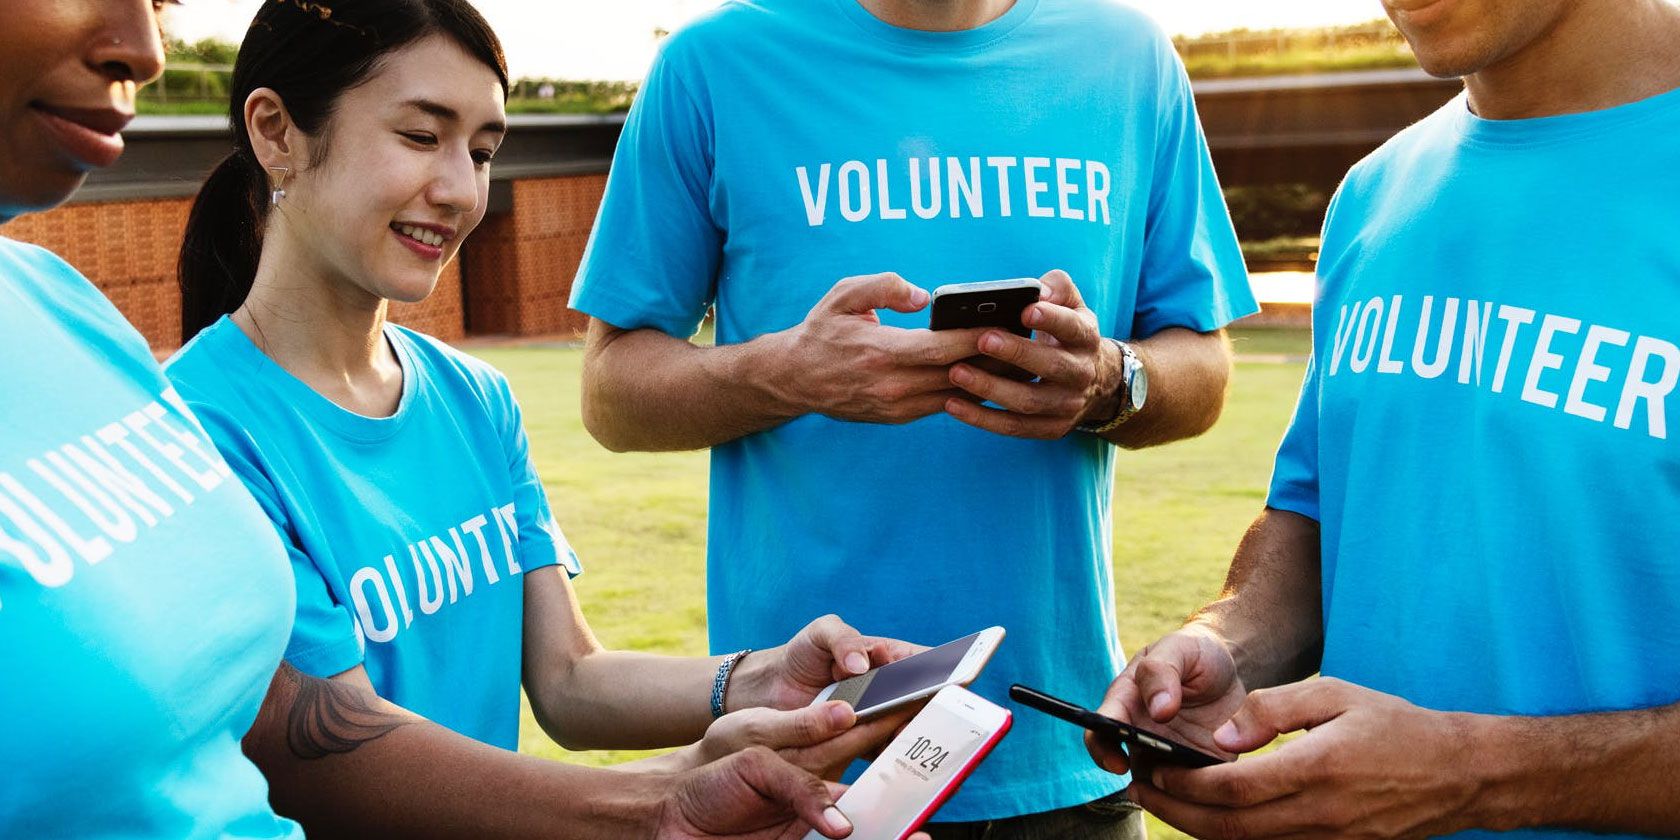 10 Websites To Find Volunteer Work That Is Perfect For You